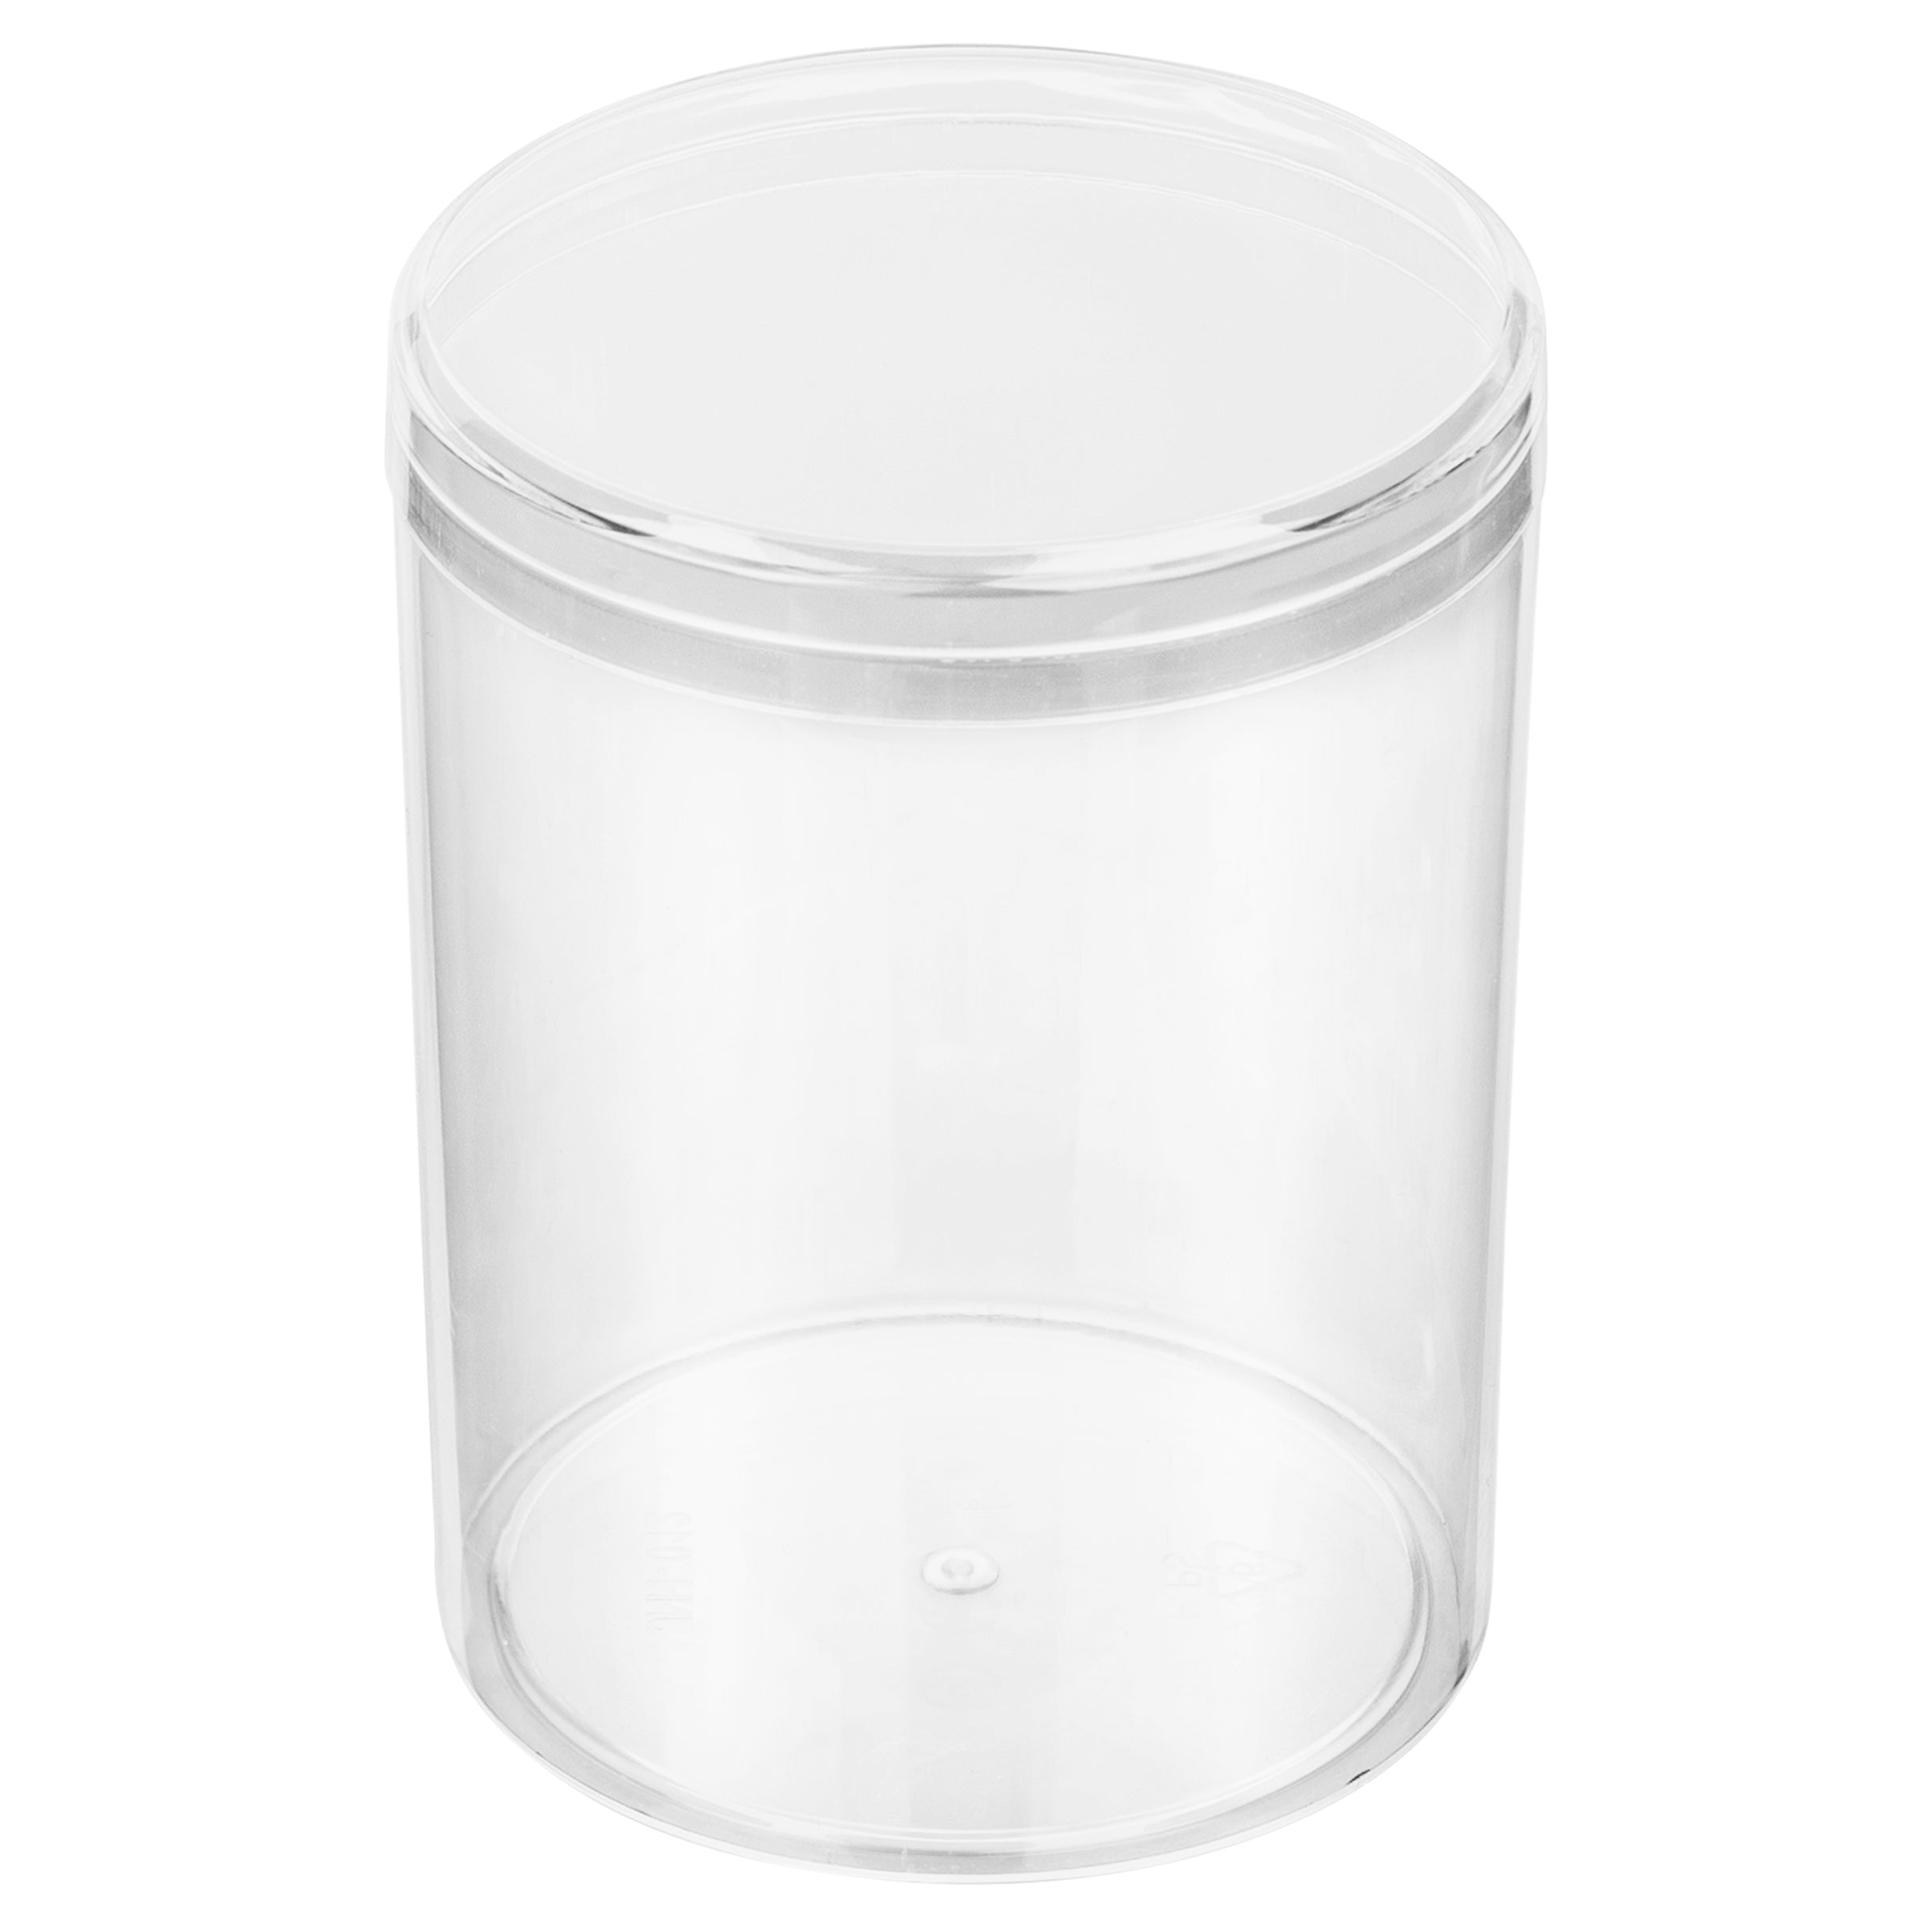  Hammont Clear Acrylic Boxes with Lid- 12 Pack, 1.75x1.75x1.75  inches, Lucite Cube Display Case for Collectibles, Storage for Small Items  and Jewelry organizer, Acrylic Containers : Home & Kitchen